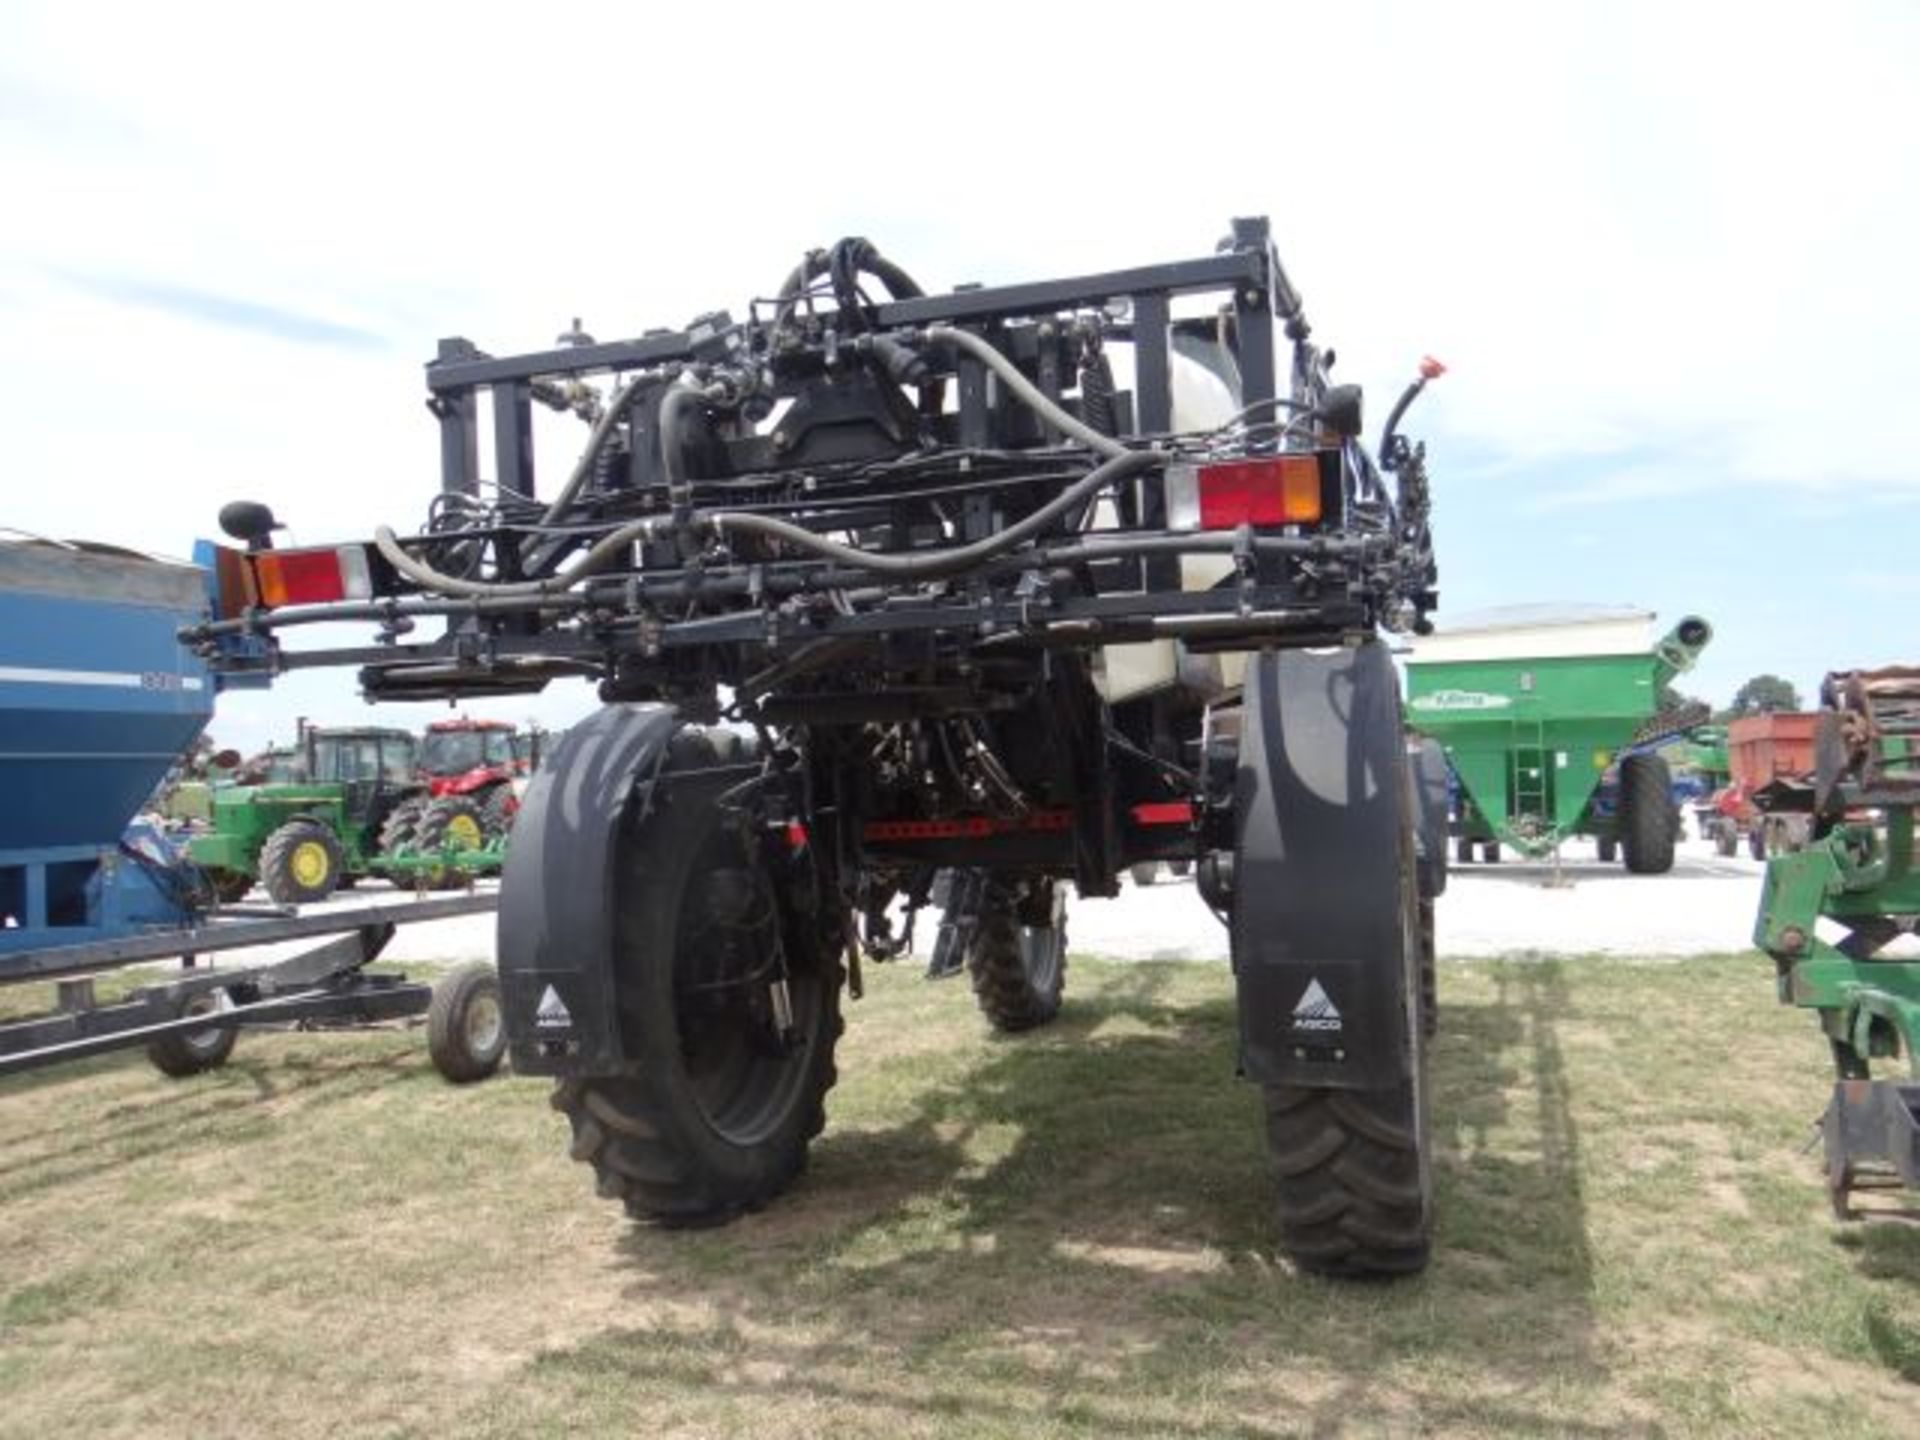 Spray-Coupe 7660 Sprayer, 2009 #65252, 2556 hrs, MFWD, Perkins Engine, 175hp, 6sp PS, 80' Poly - Image 2 of 5